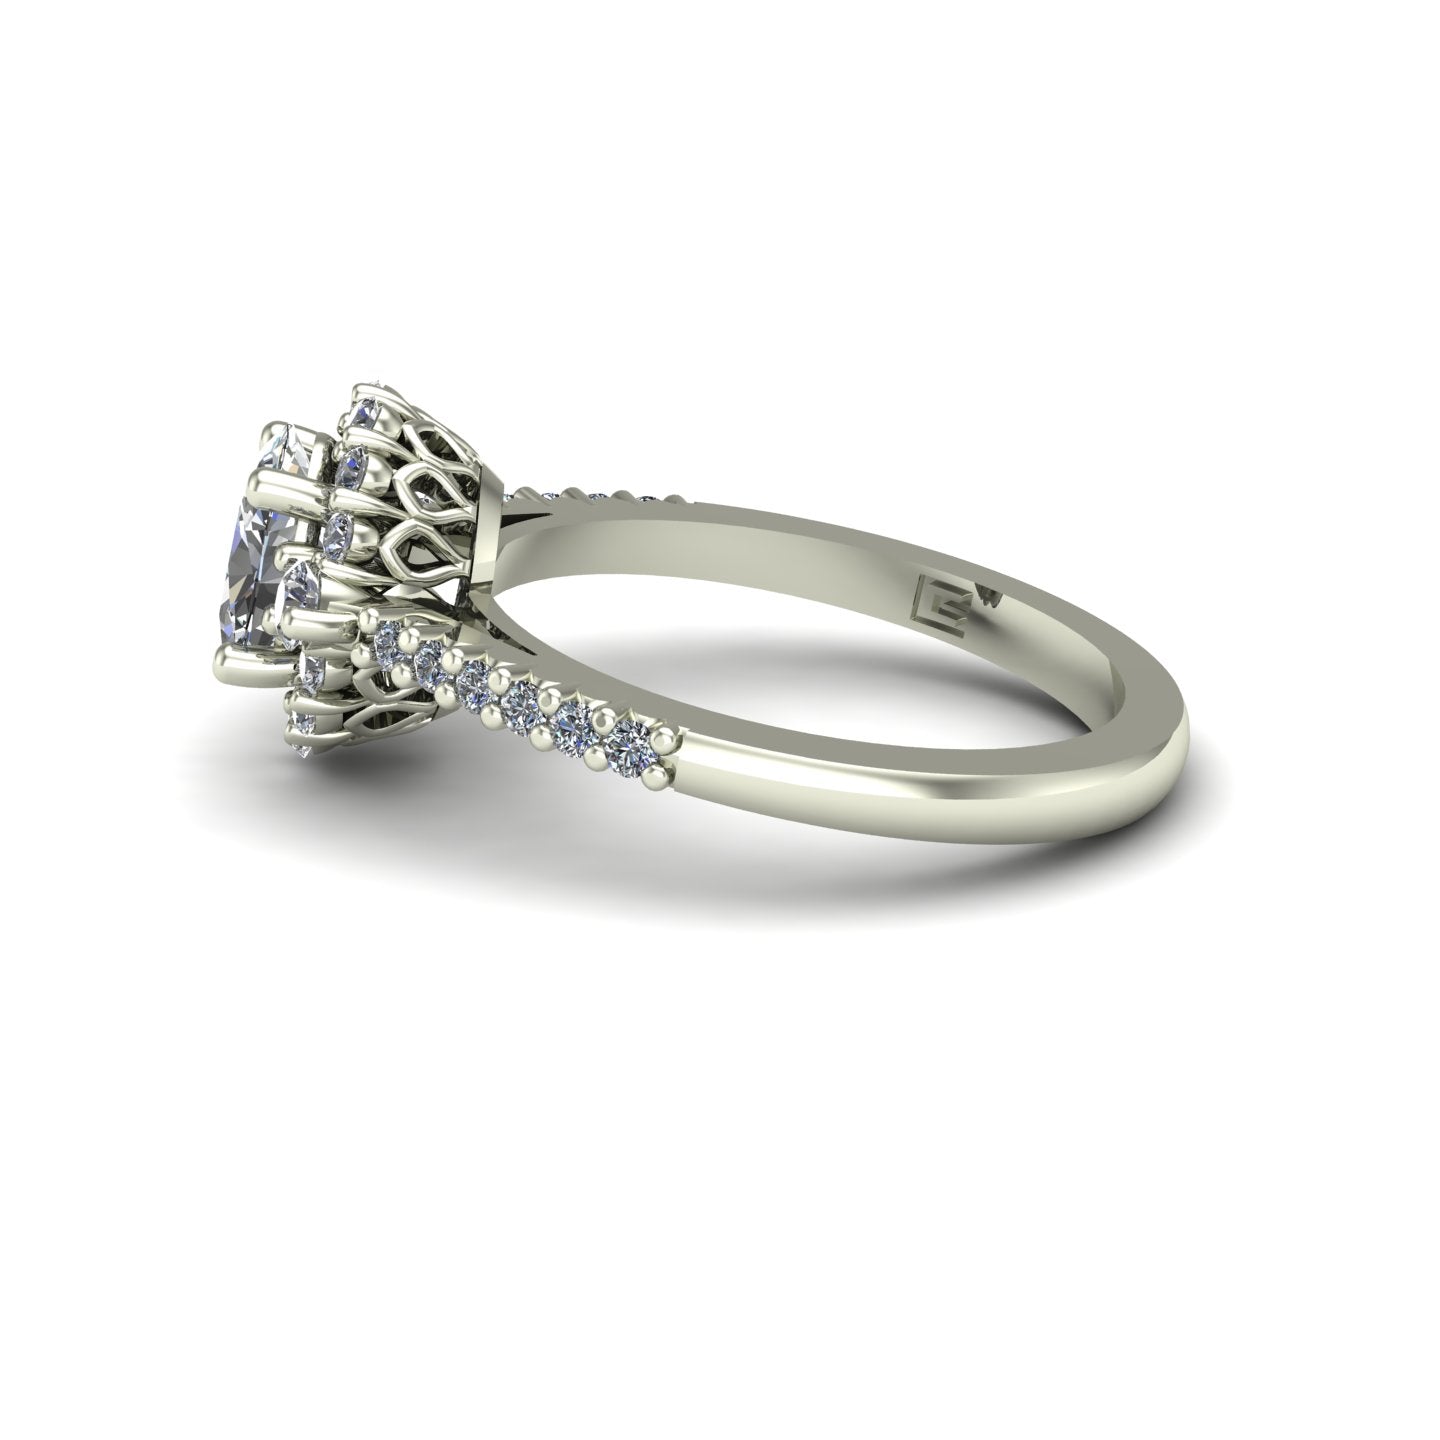 oval diamond engagement ring in 14k white gold - Charles Babb Designs - side view